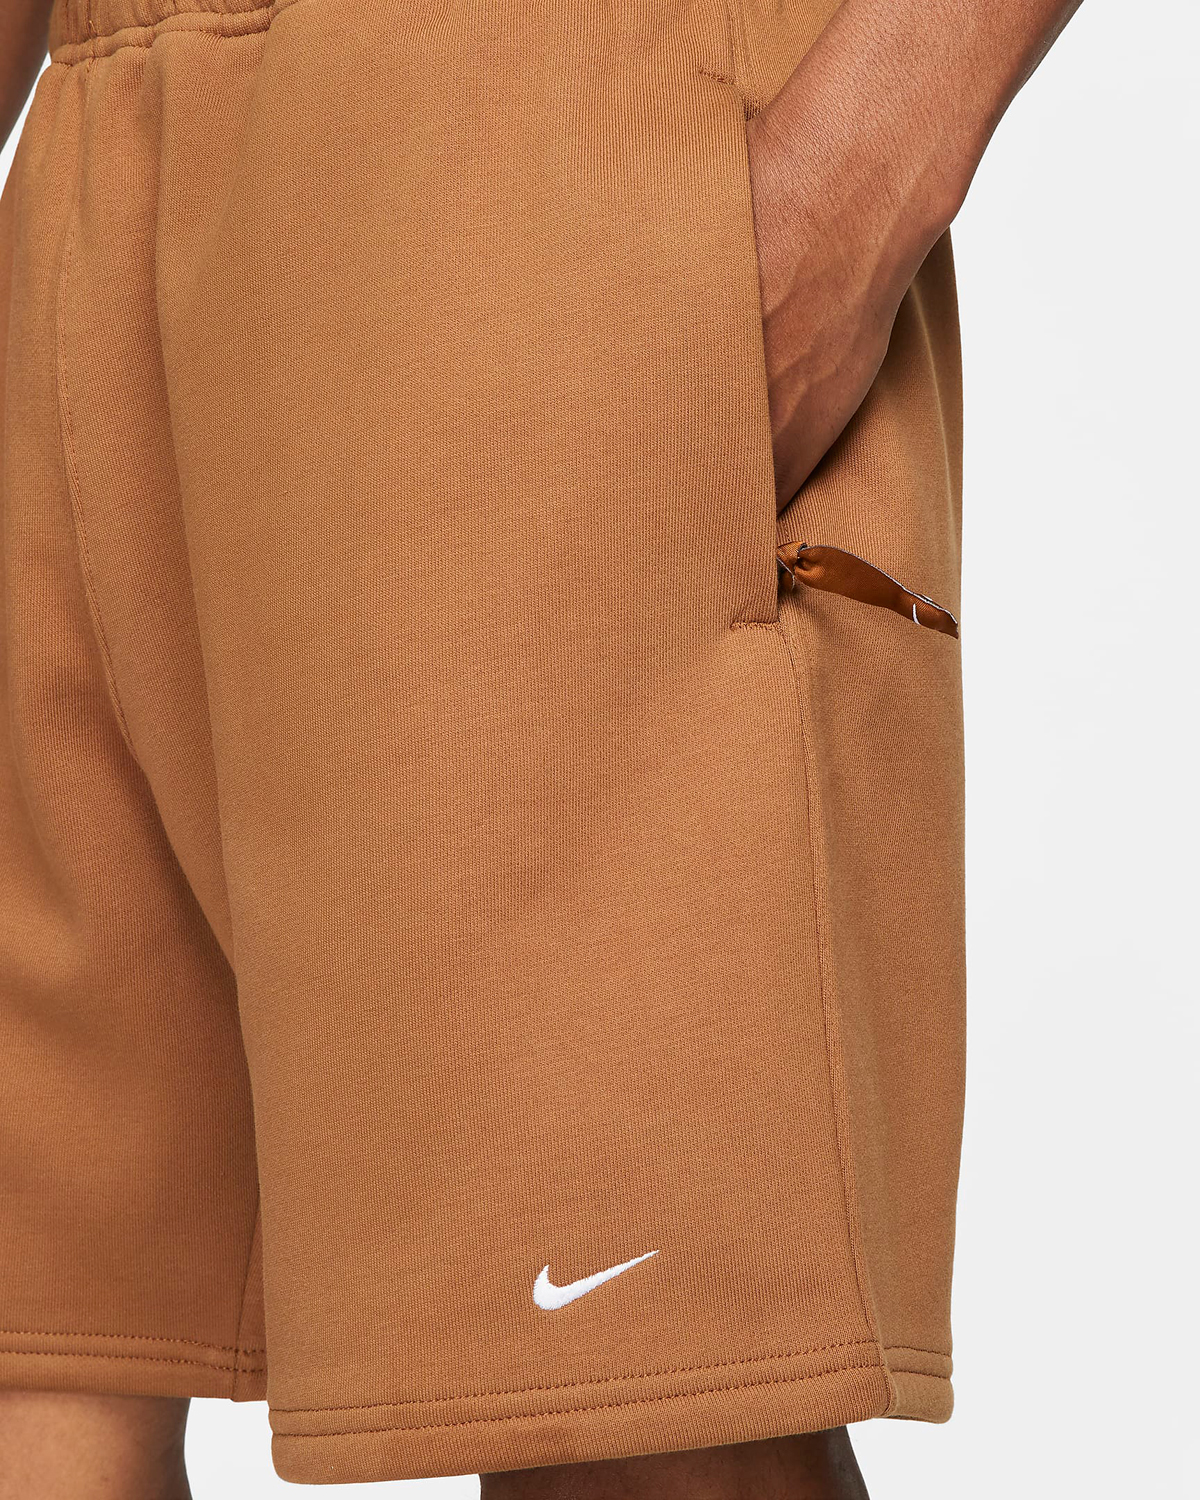 Nike-Solo-Swoosh-Shorts-Ale-Brown-2